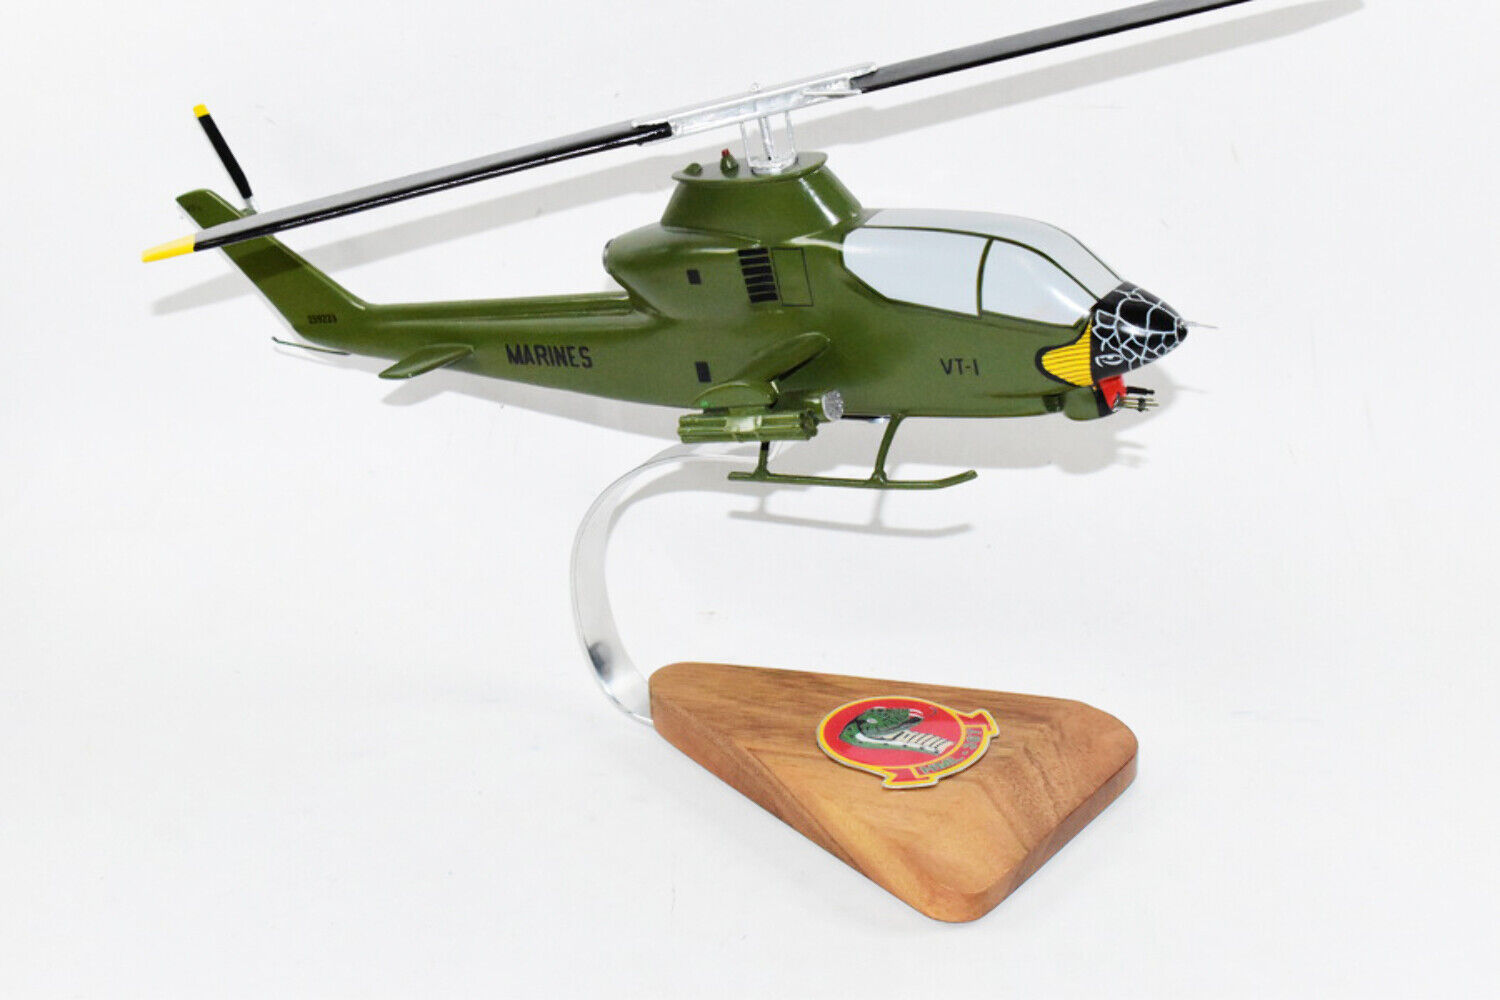 Bell® AH-1G Cobra, HML-367 Scarface Vietnam, 16 in Mahogany Scale Model